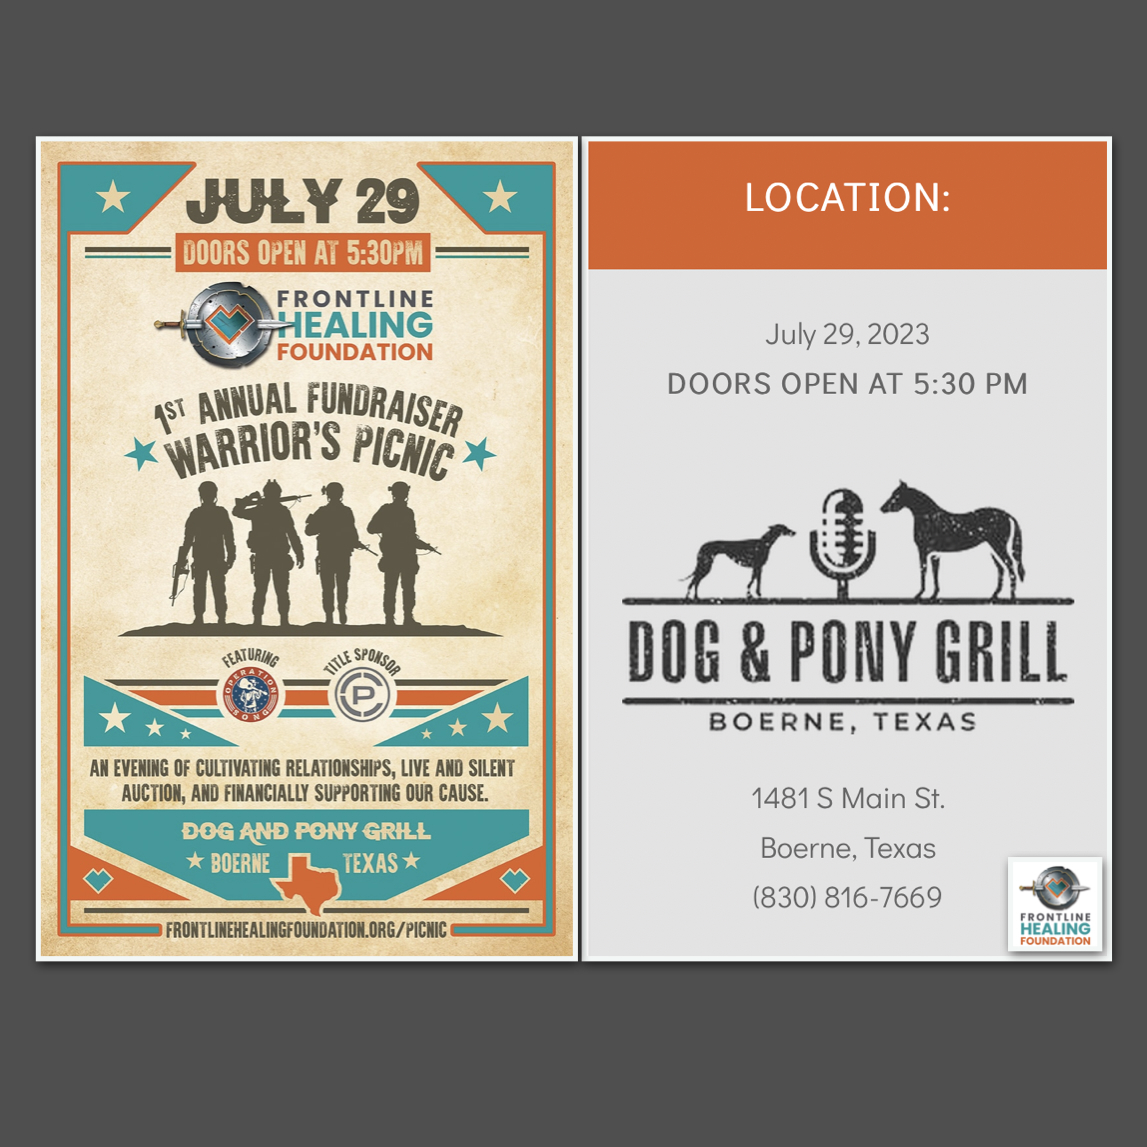 The Frontline Healing Foundation announces that it will host their First Annual Warriors Picnic in partnership with Operation Song on Saturday, July 29, 2023, at the Dog & Pony Grill.